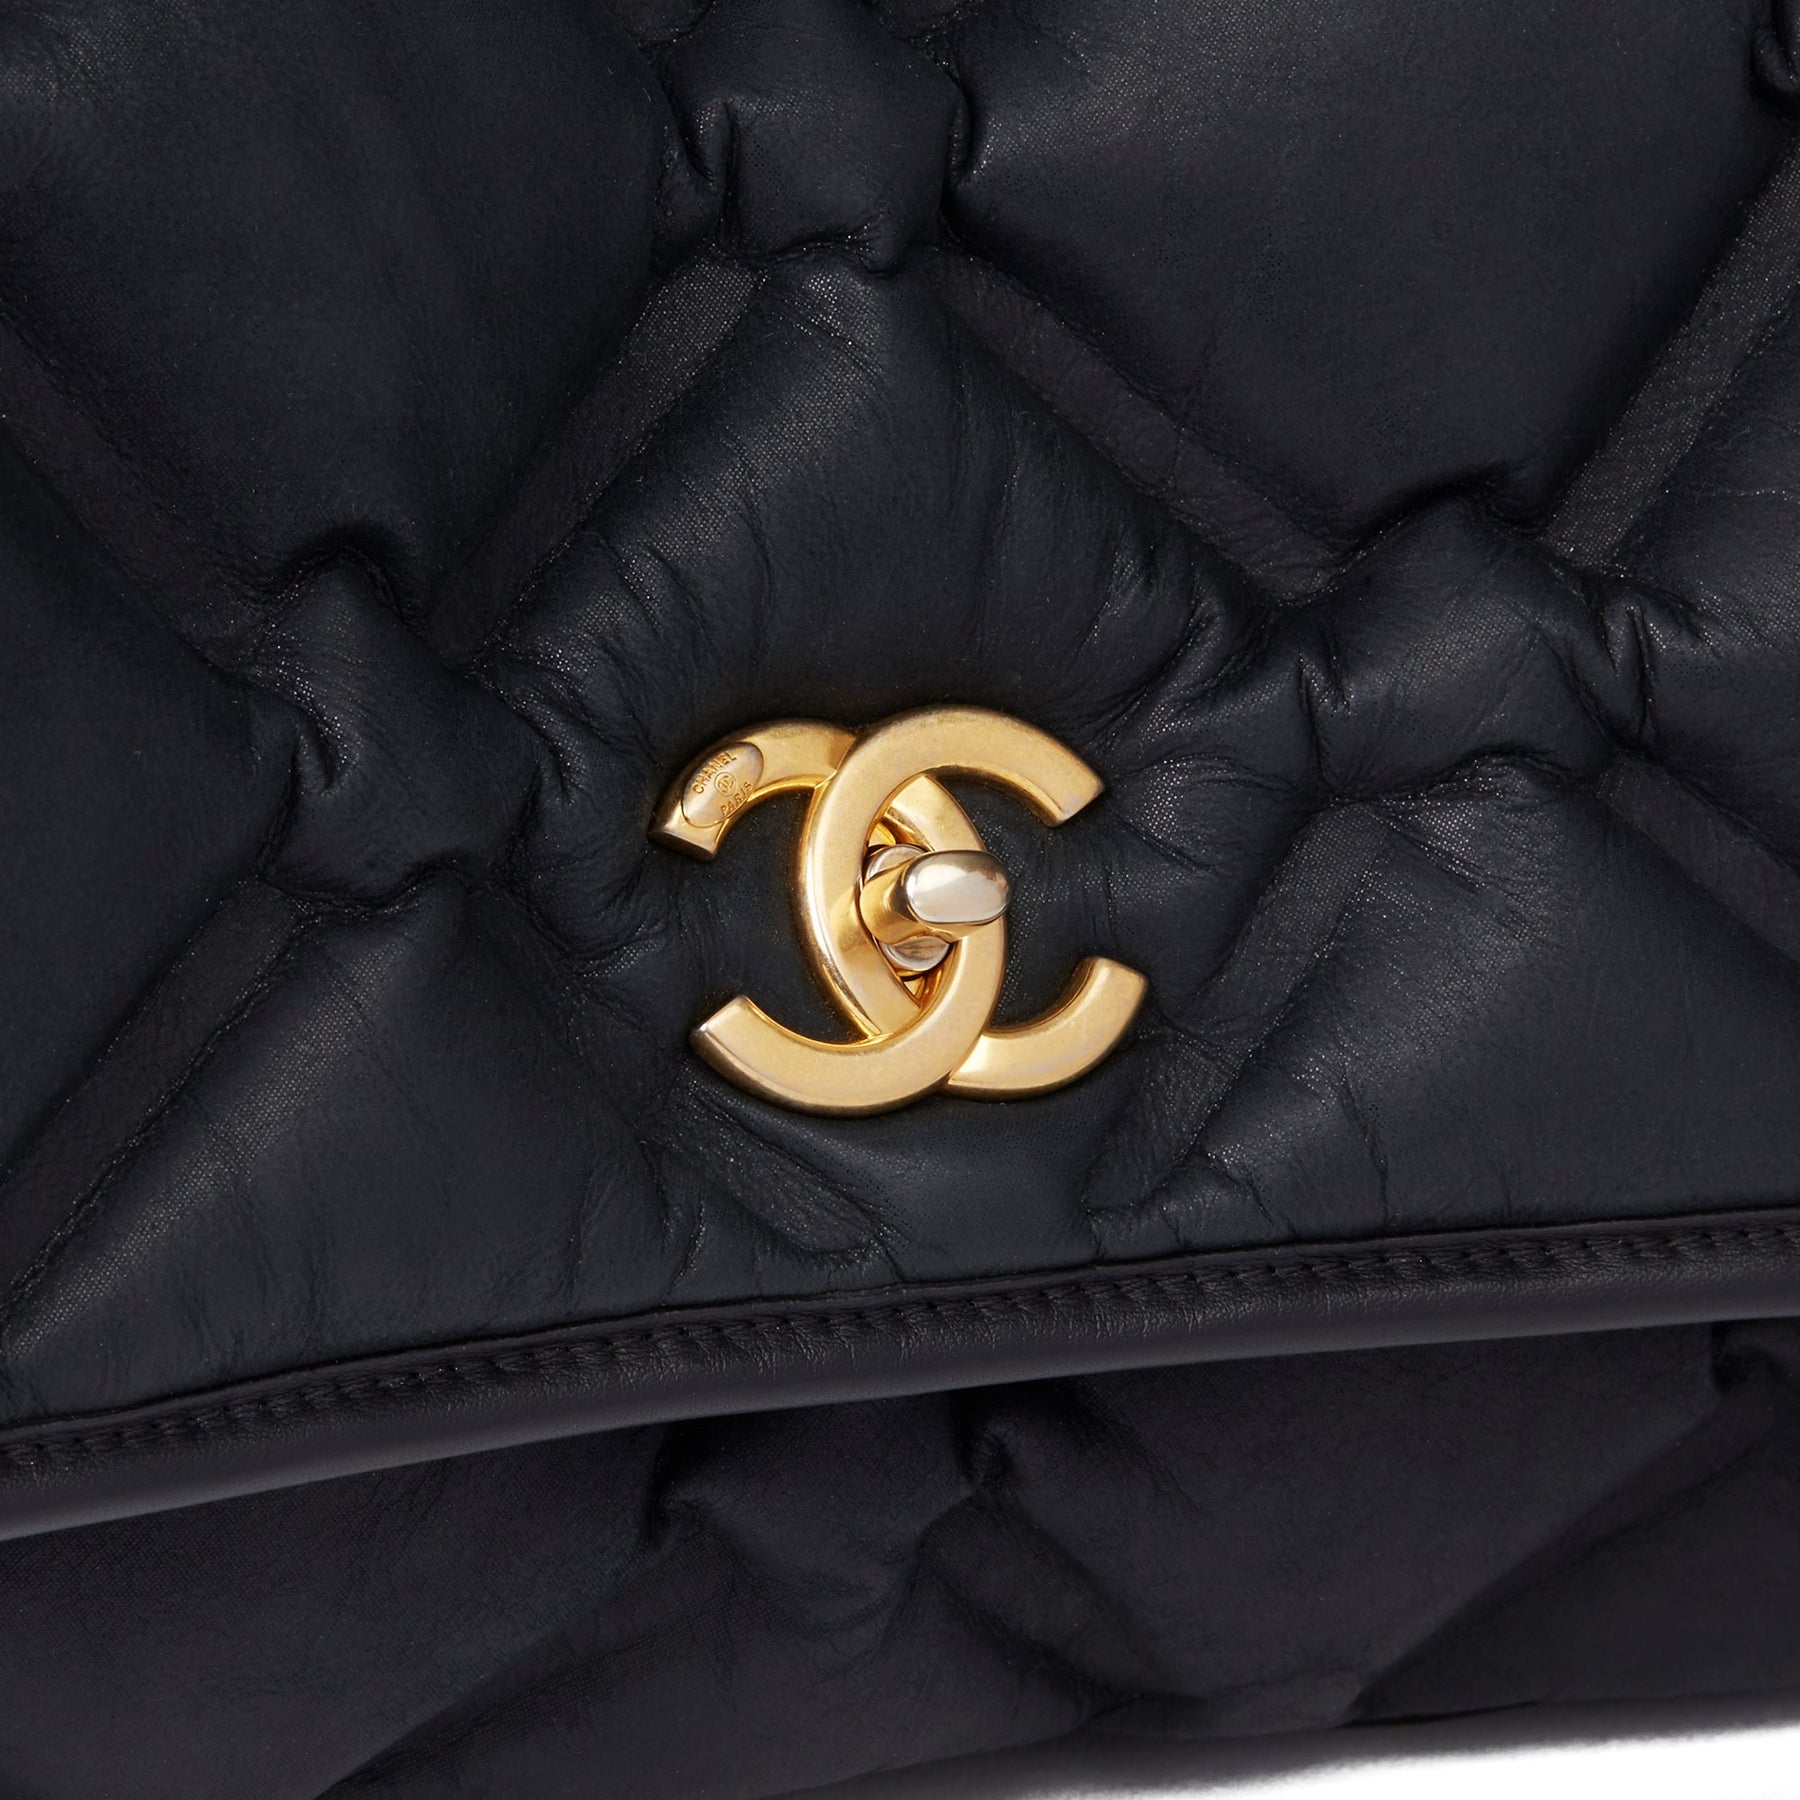 Chanel Brown Quilted Nubuck Leather Small Chesterfield Padding Boy Flap Bag  Chanel | The Luxury Closet